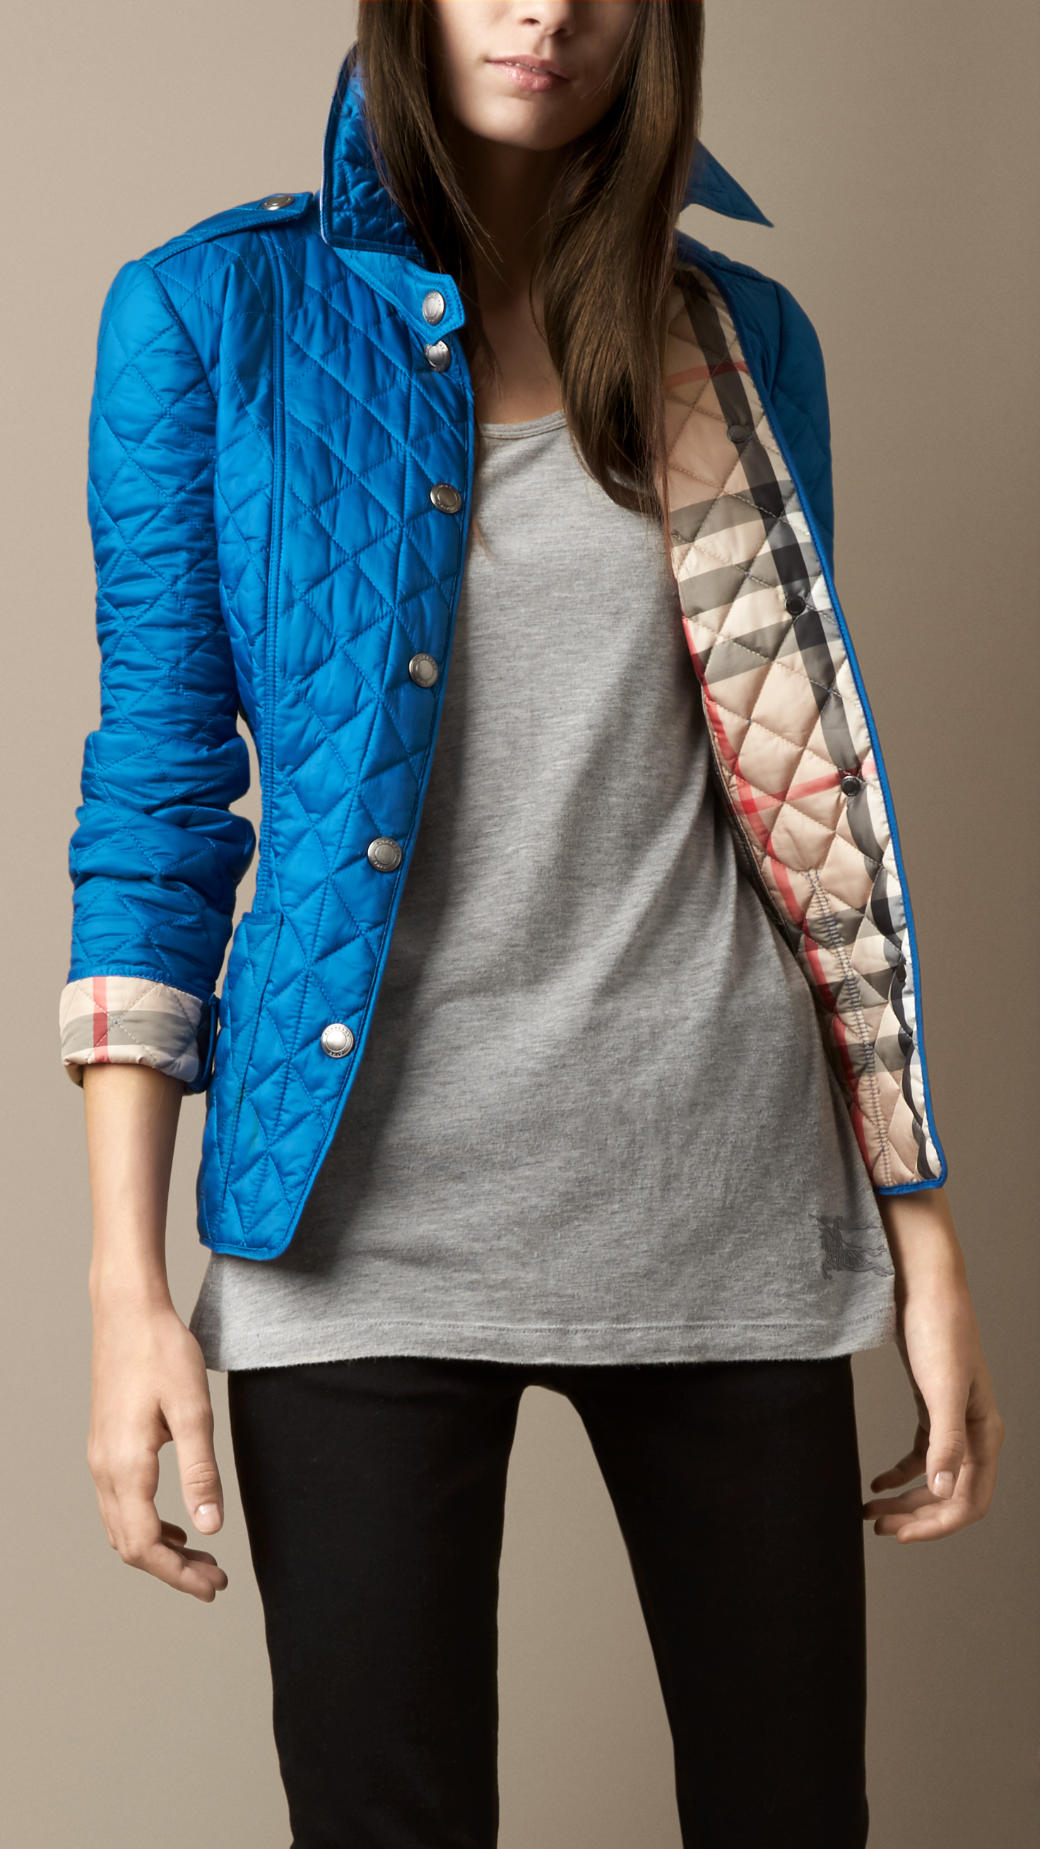 Burberry Diamond Quilted Jacket in Blue 